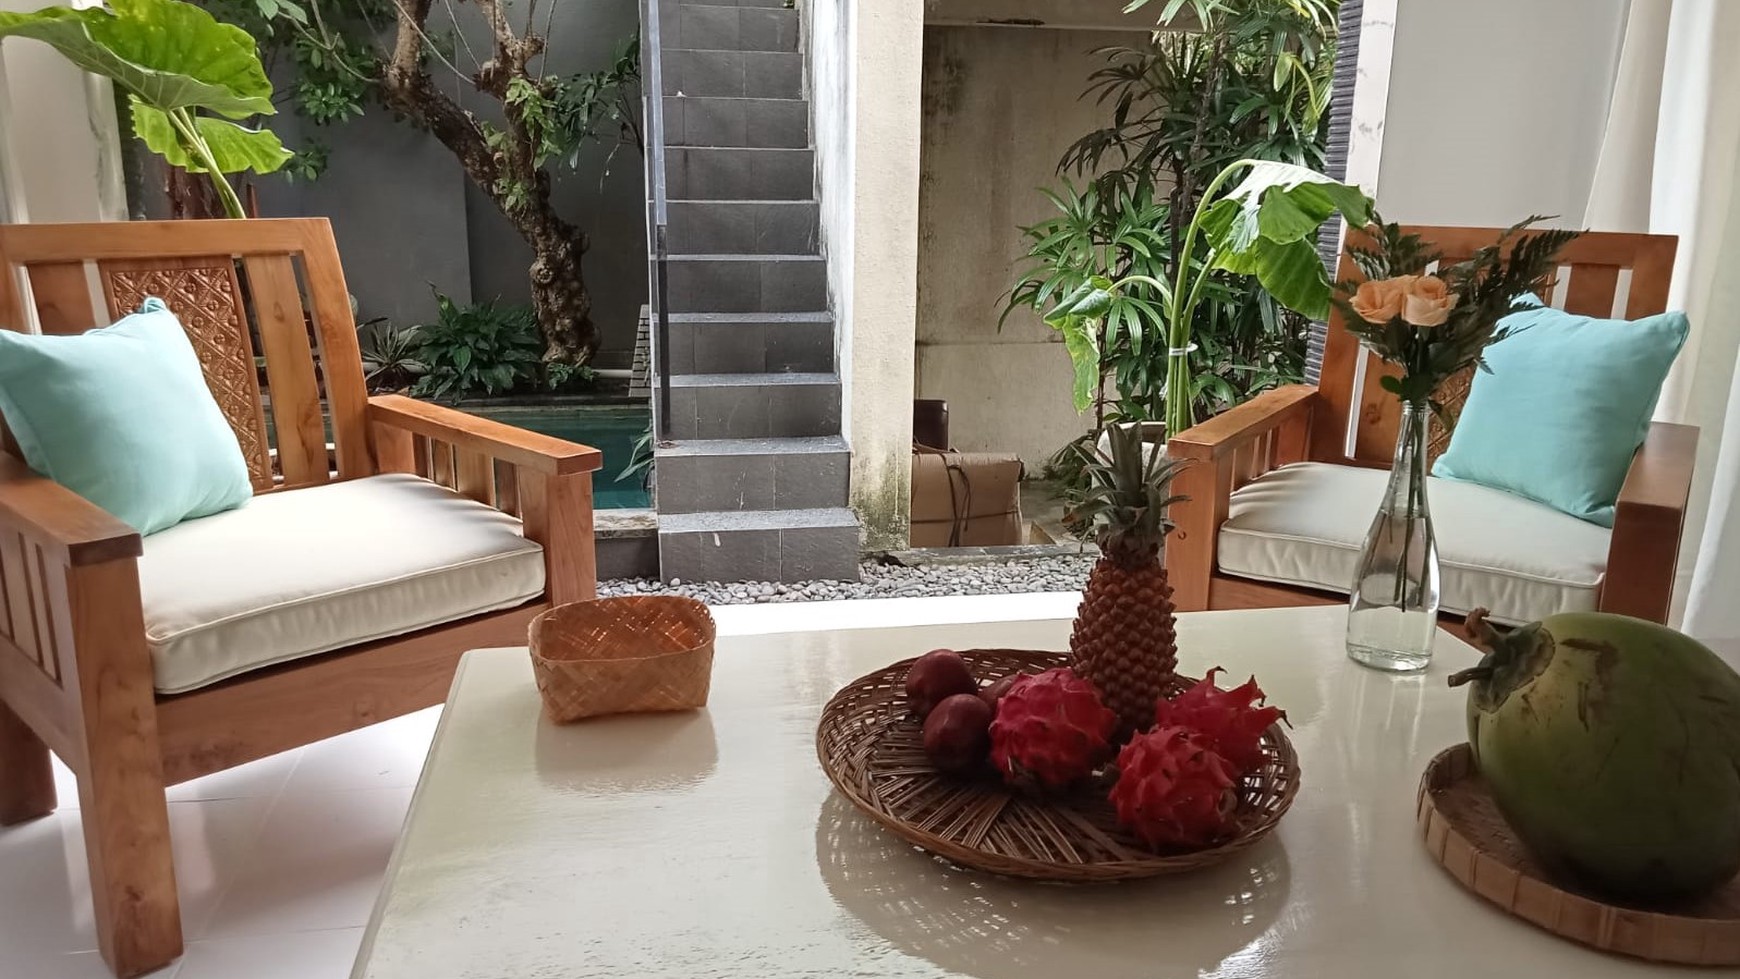 For Rent Yearly - Modern nice villa 3 bedrooms in Pererenan